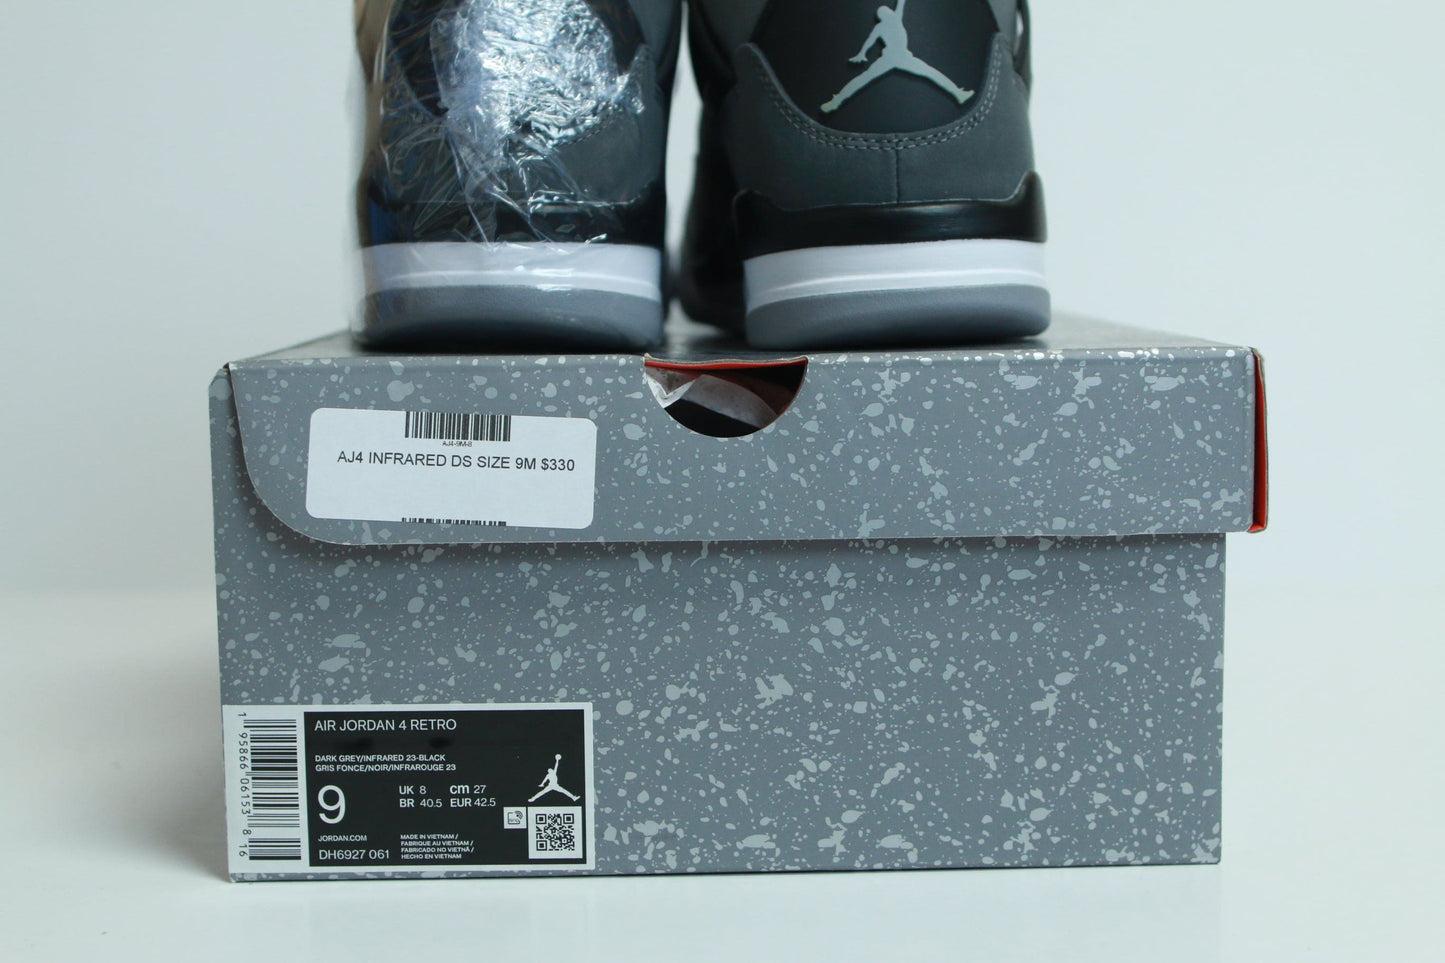 AJ4 INFRARED DS SIZE 9M